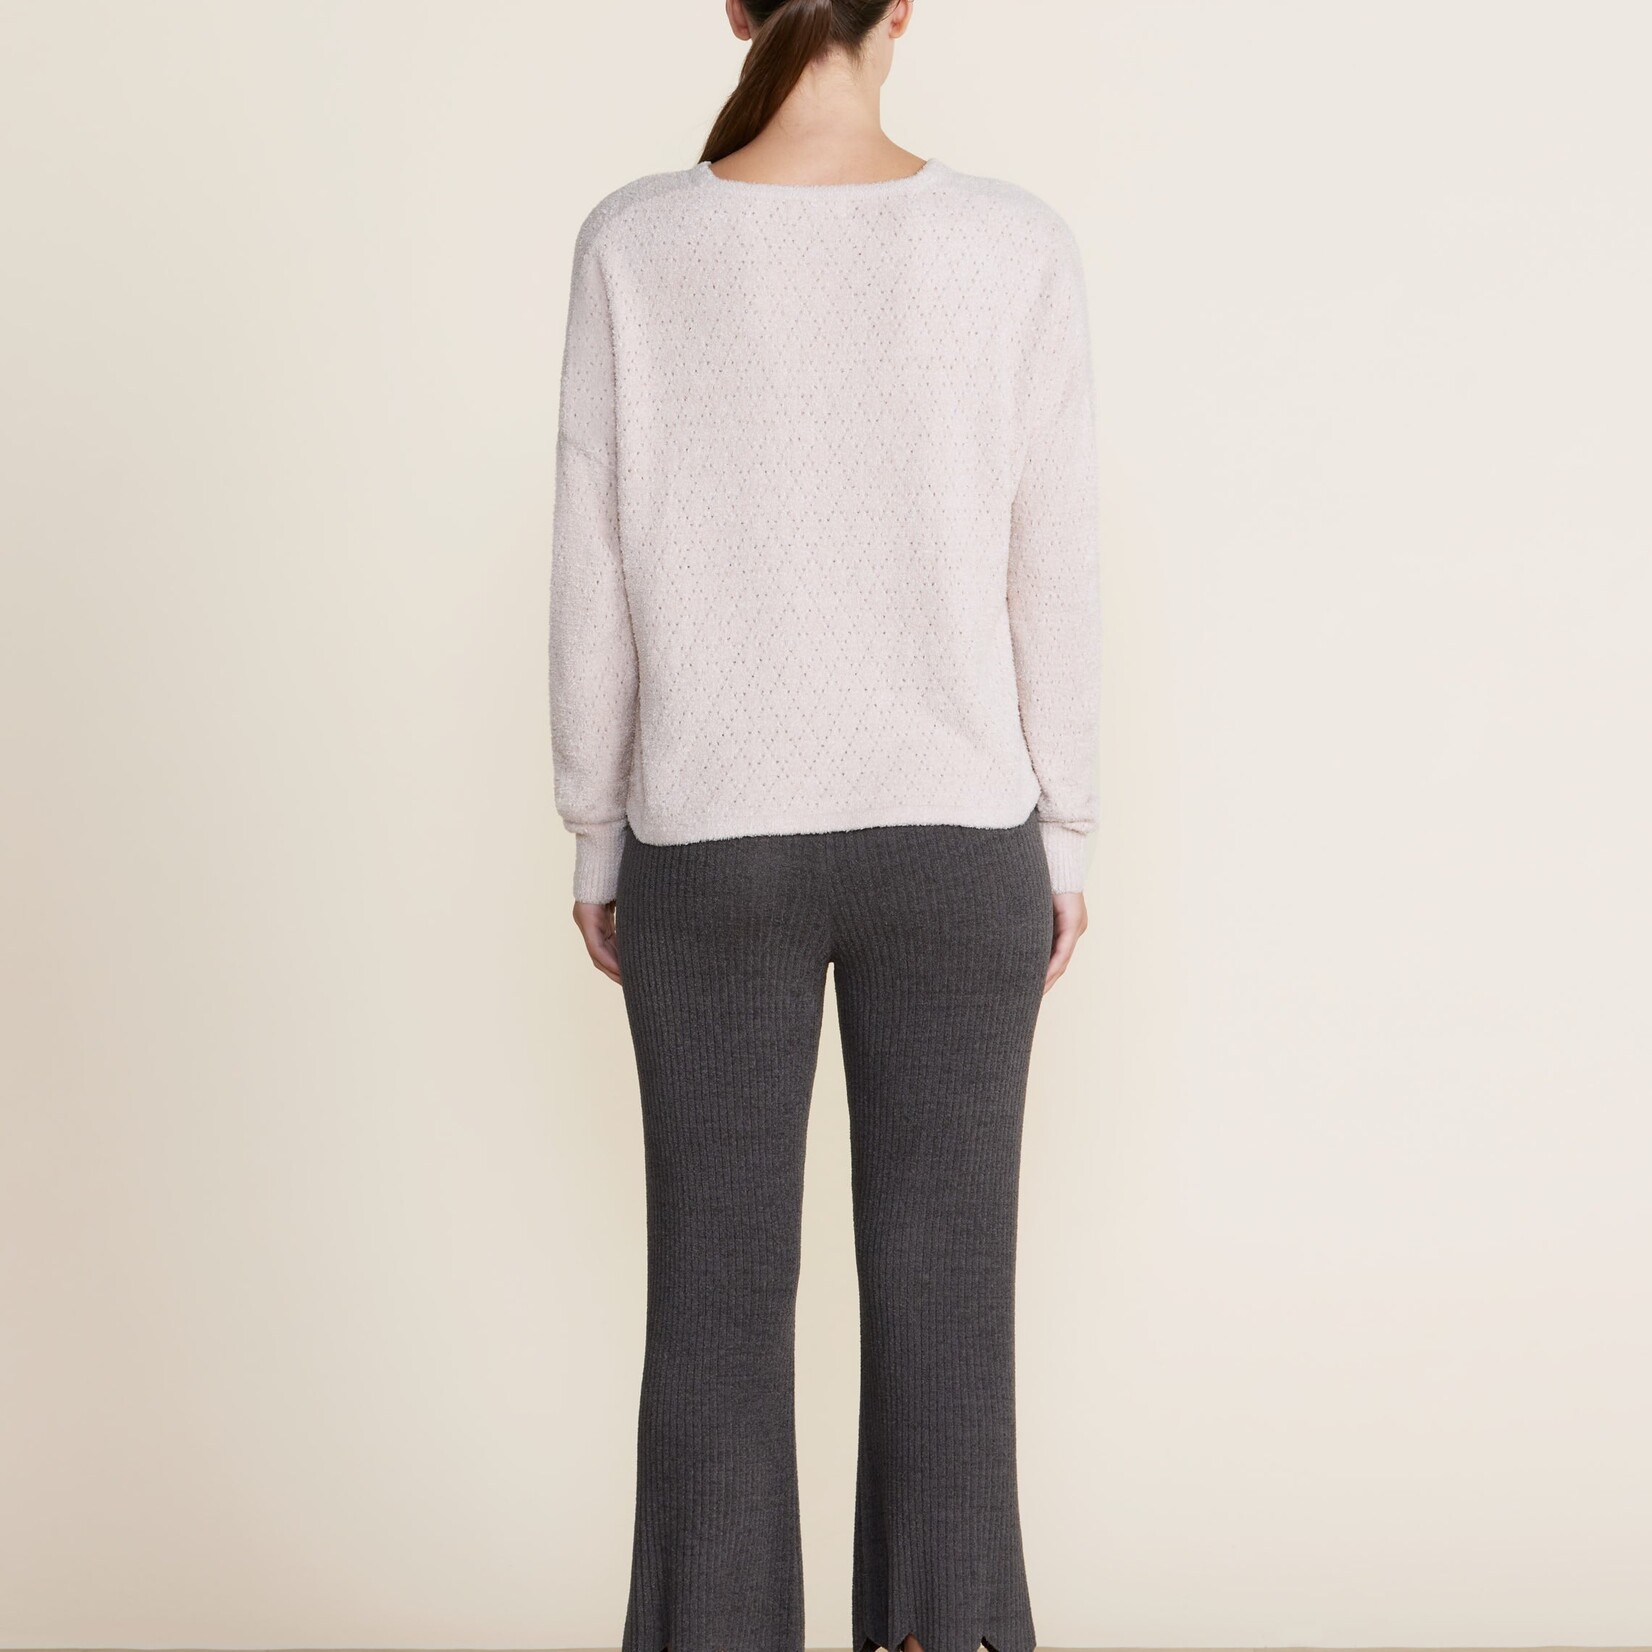 Barefoot Dreams Barefoot Dreams - Chai CCL Diamond Pointelle Pullover